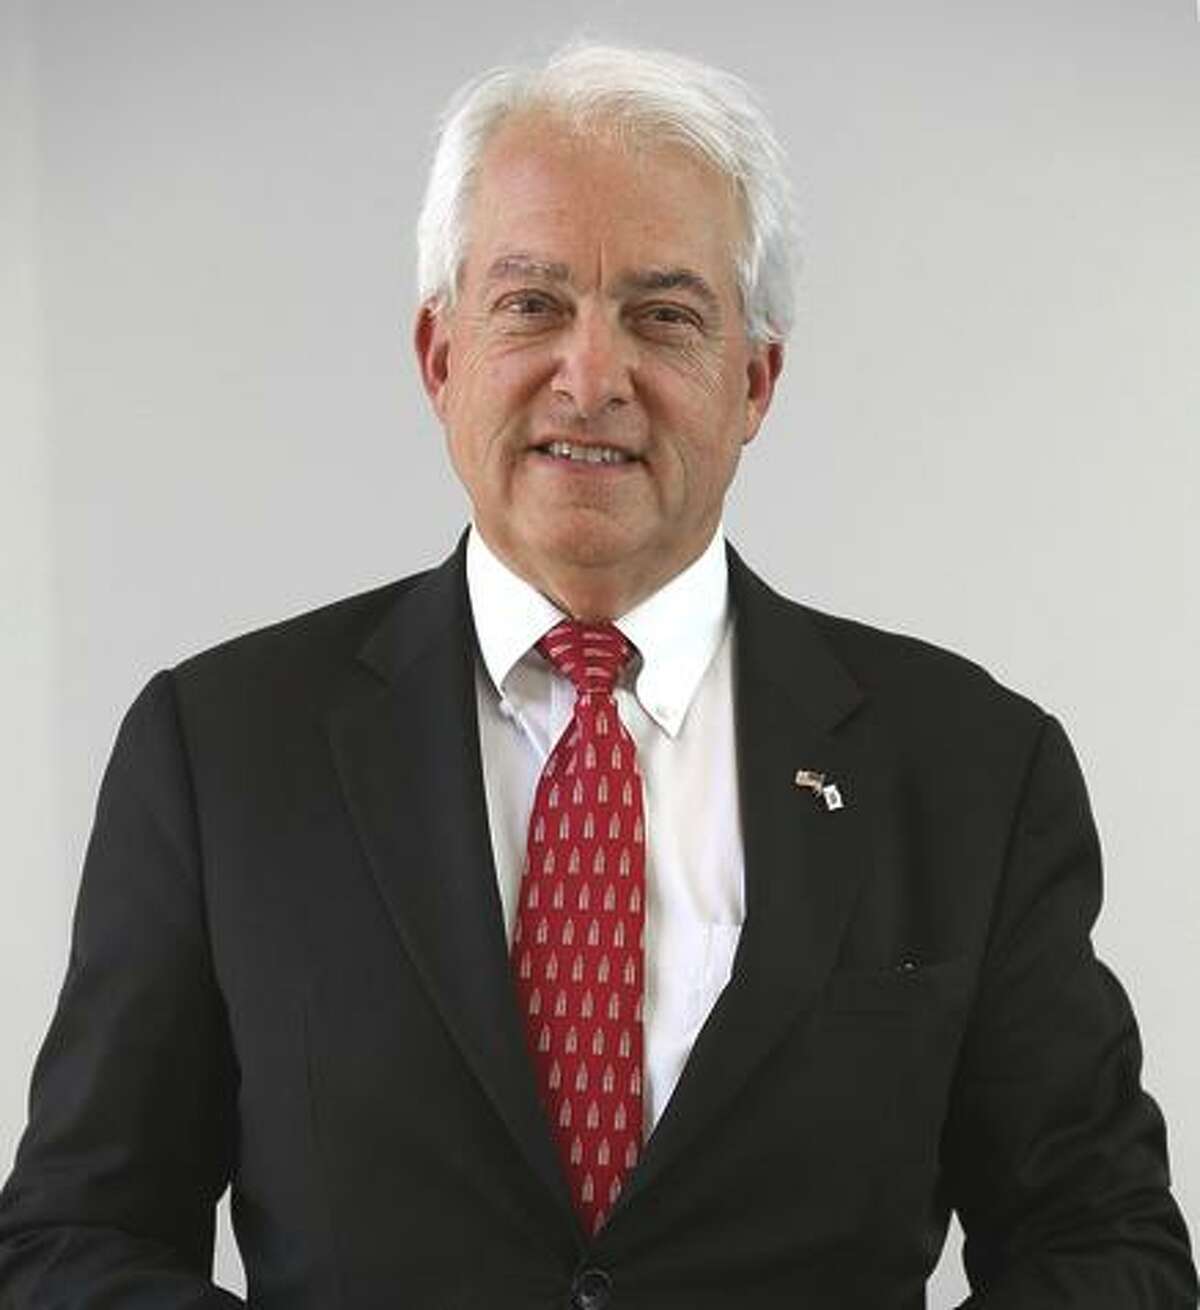 Even though he didn’t vote for President Trump, John Cox won his endorsement.